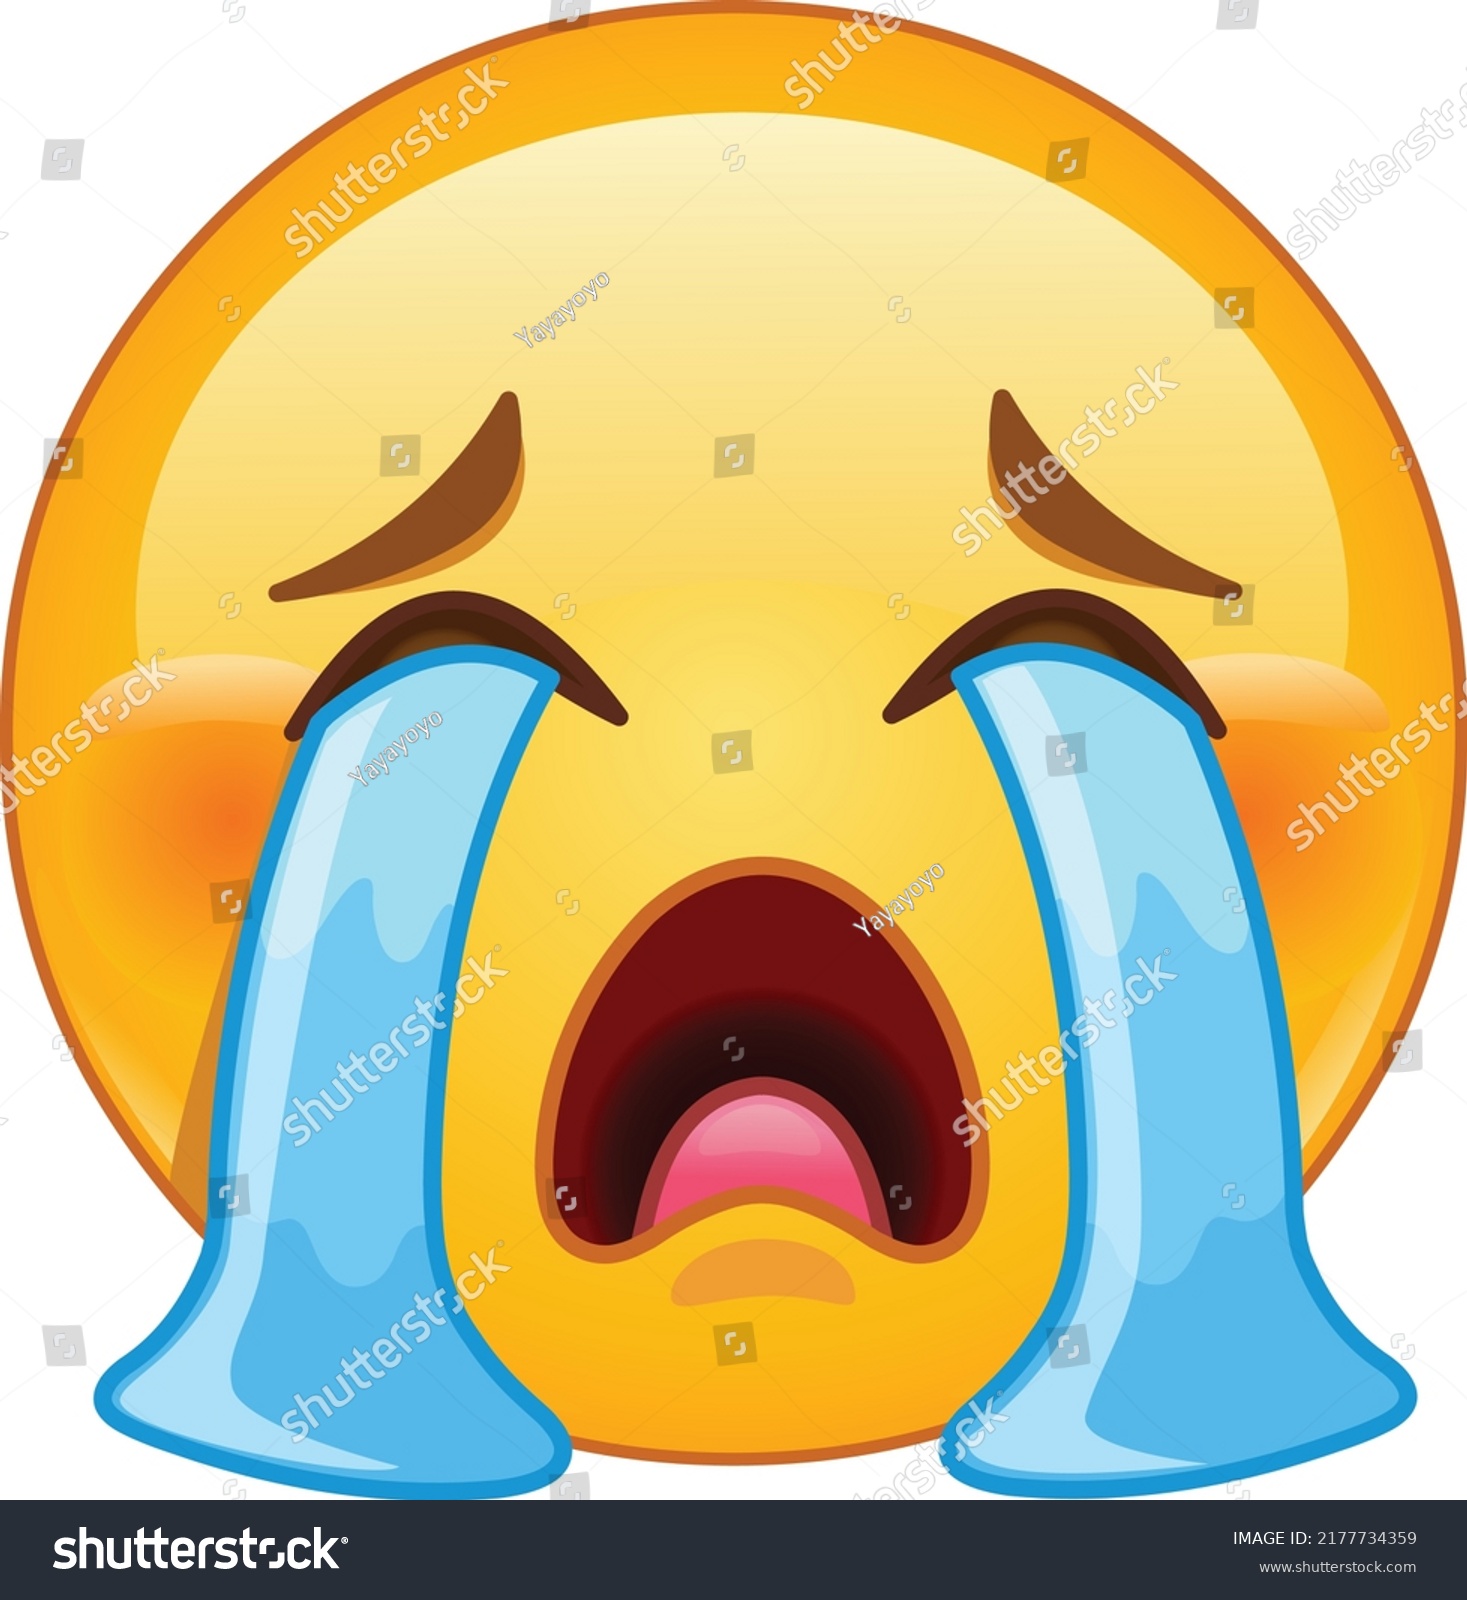 Emoji Emoticon Face Loudly Crying Stock Vector (Royalty Free ...